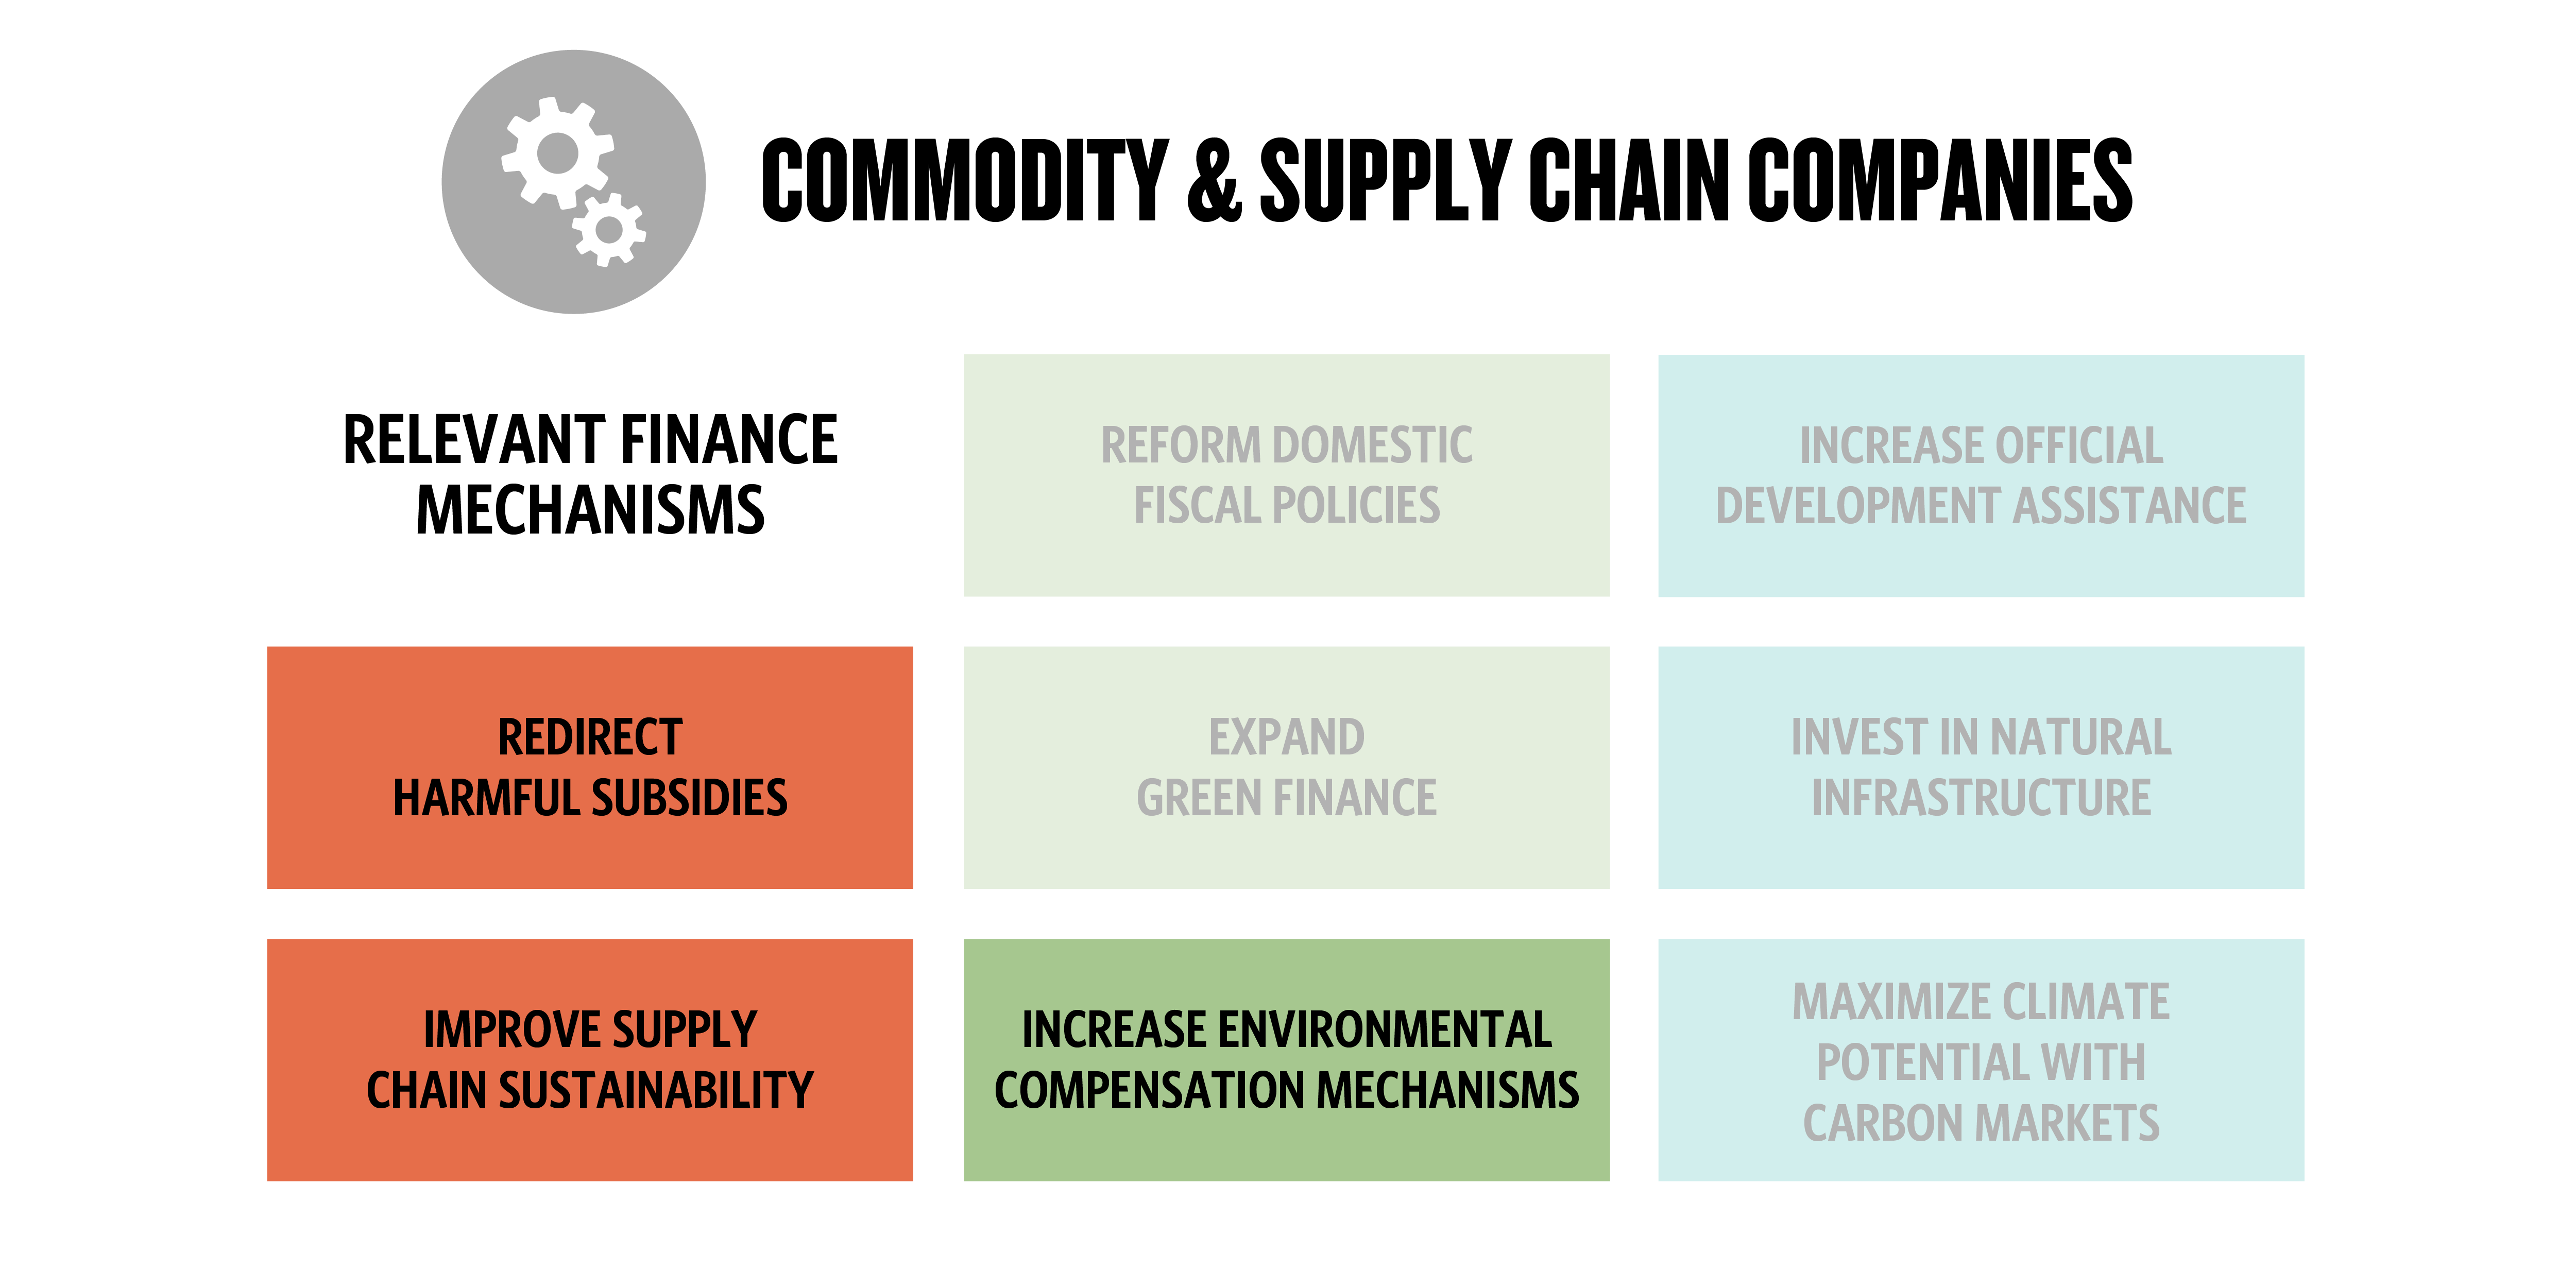 eight boxes with three highlighted to represent which financial mechanisms are relevant to commodity and supply chain companies